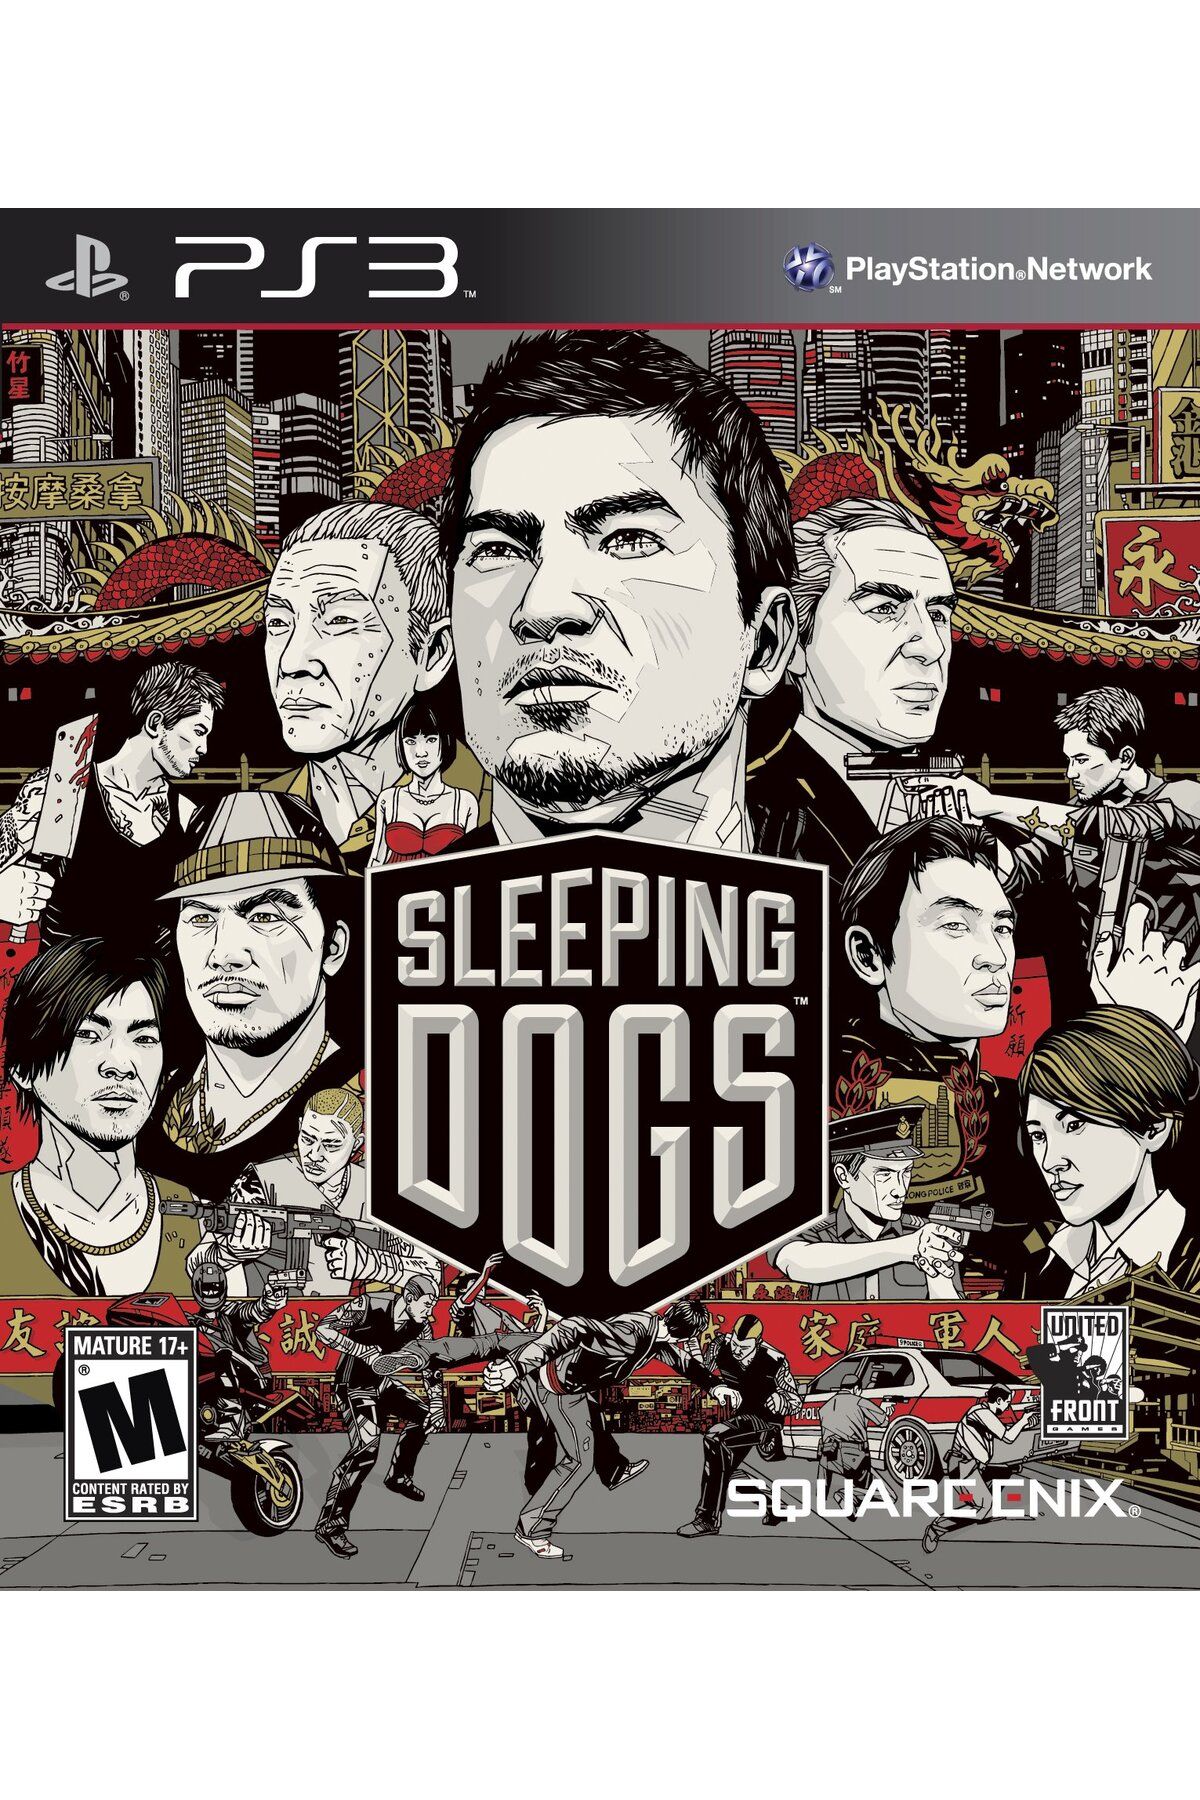 Square Enix Ps3 Sleeping Dogs